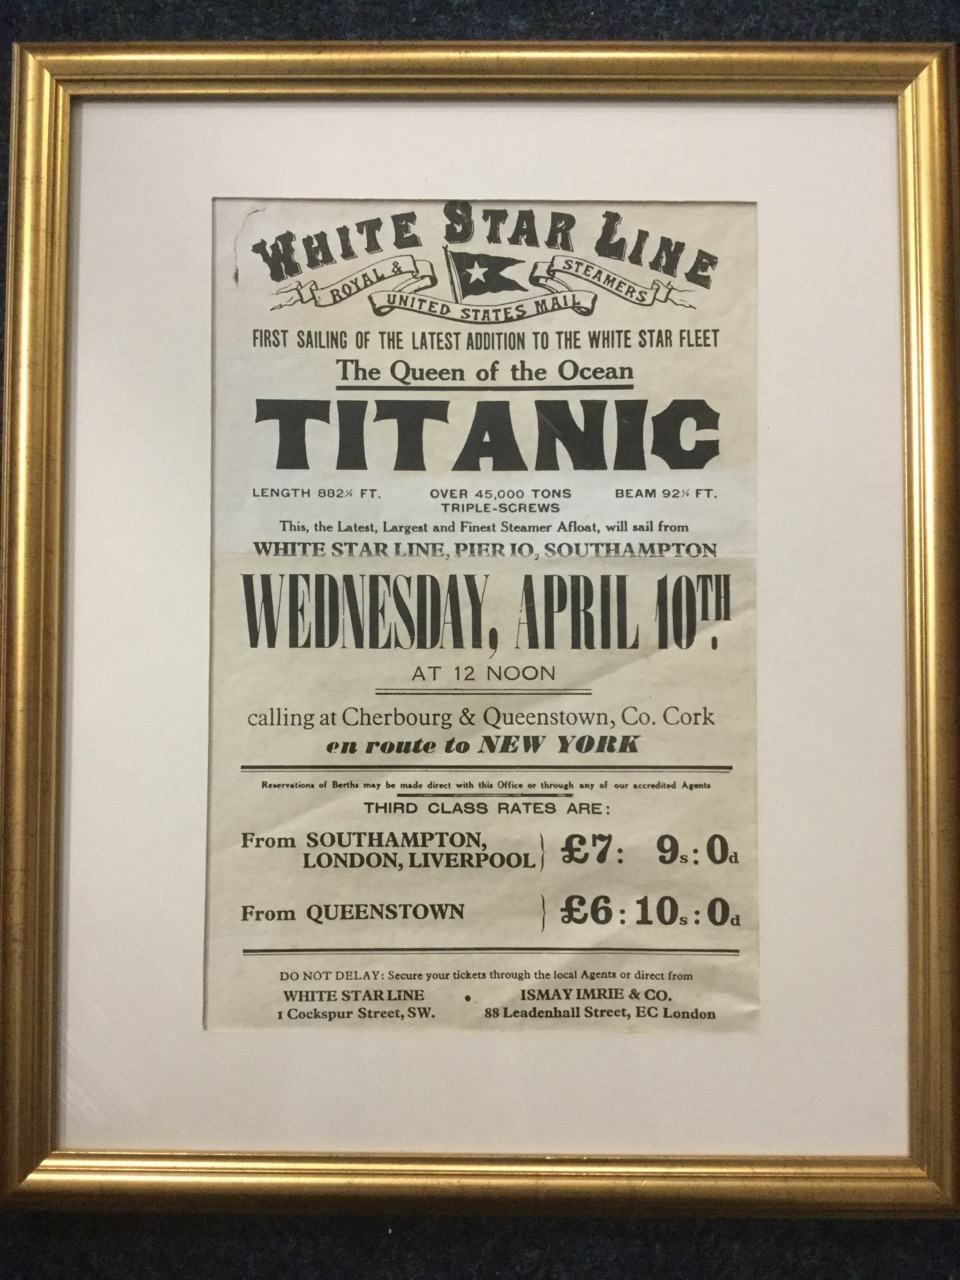 A poster advertising the first sailing of the Titanic from Southampton, the letterpress printed